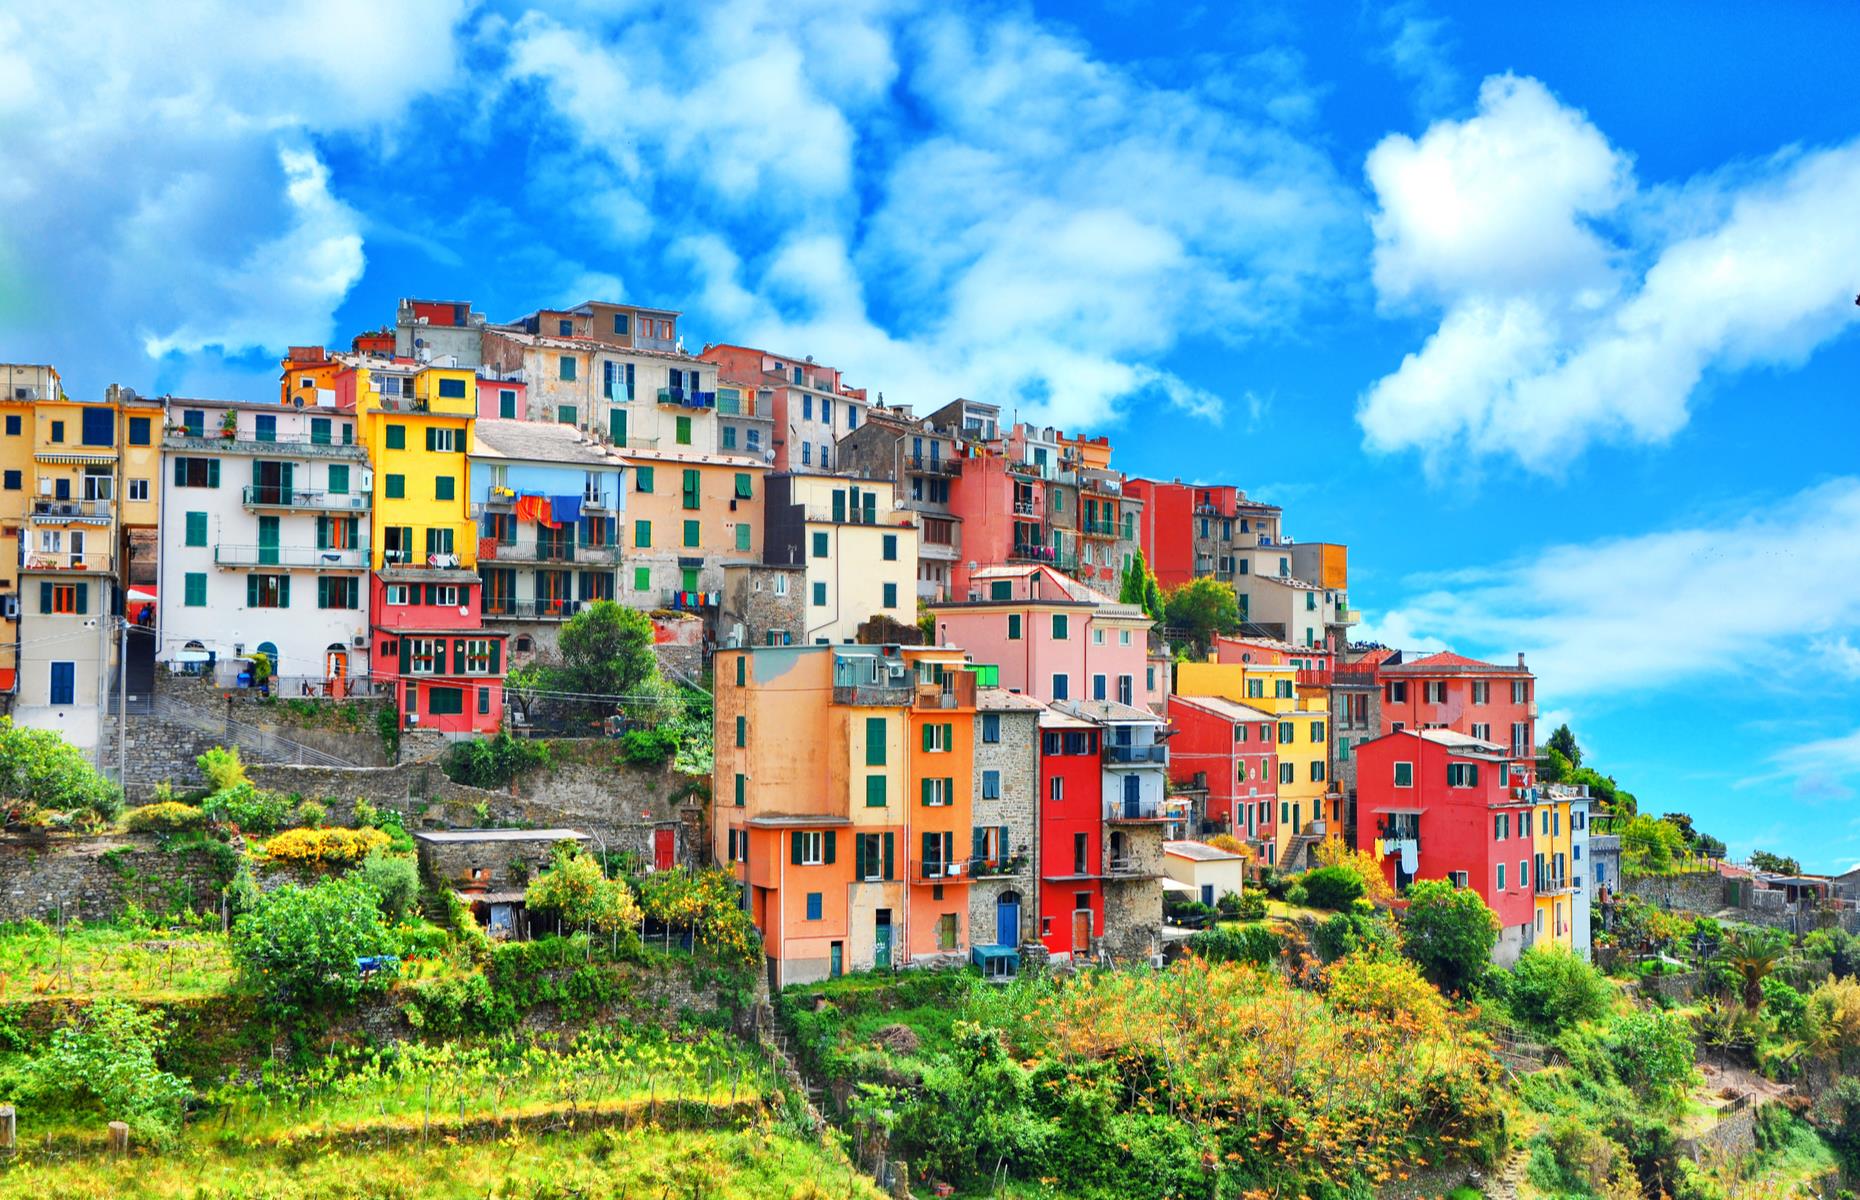 <p>Disney and Pixar’s pastel-hued Portorosso, the fictional town in 2021 film <em>Luca</em>, was inspired by Cinque Terre in Liguria, Italy. Production designer Daniela Strijleva and Genoa-born director Enrico Casarosa took various trips to this part of Italy, where Casarosa spent childhood holidays. Monterosso is one of the five little cliffside villages that influenced the film, along with Corniglia (pictured) and Vernazza, whose piazza features in the film. </p>